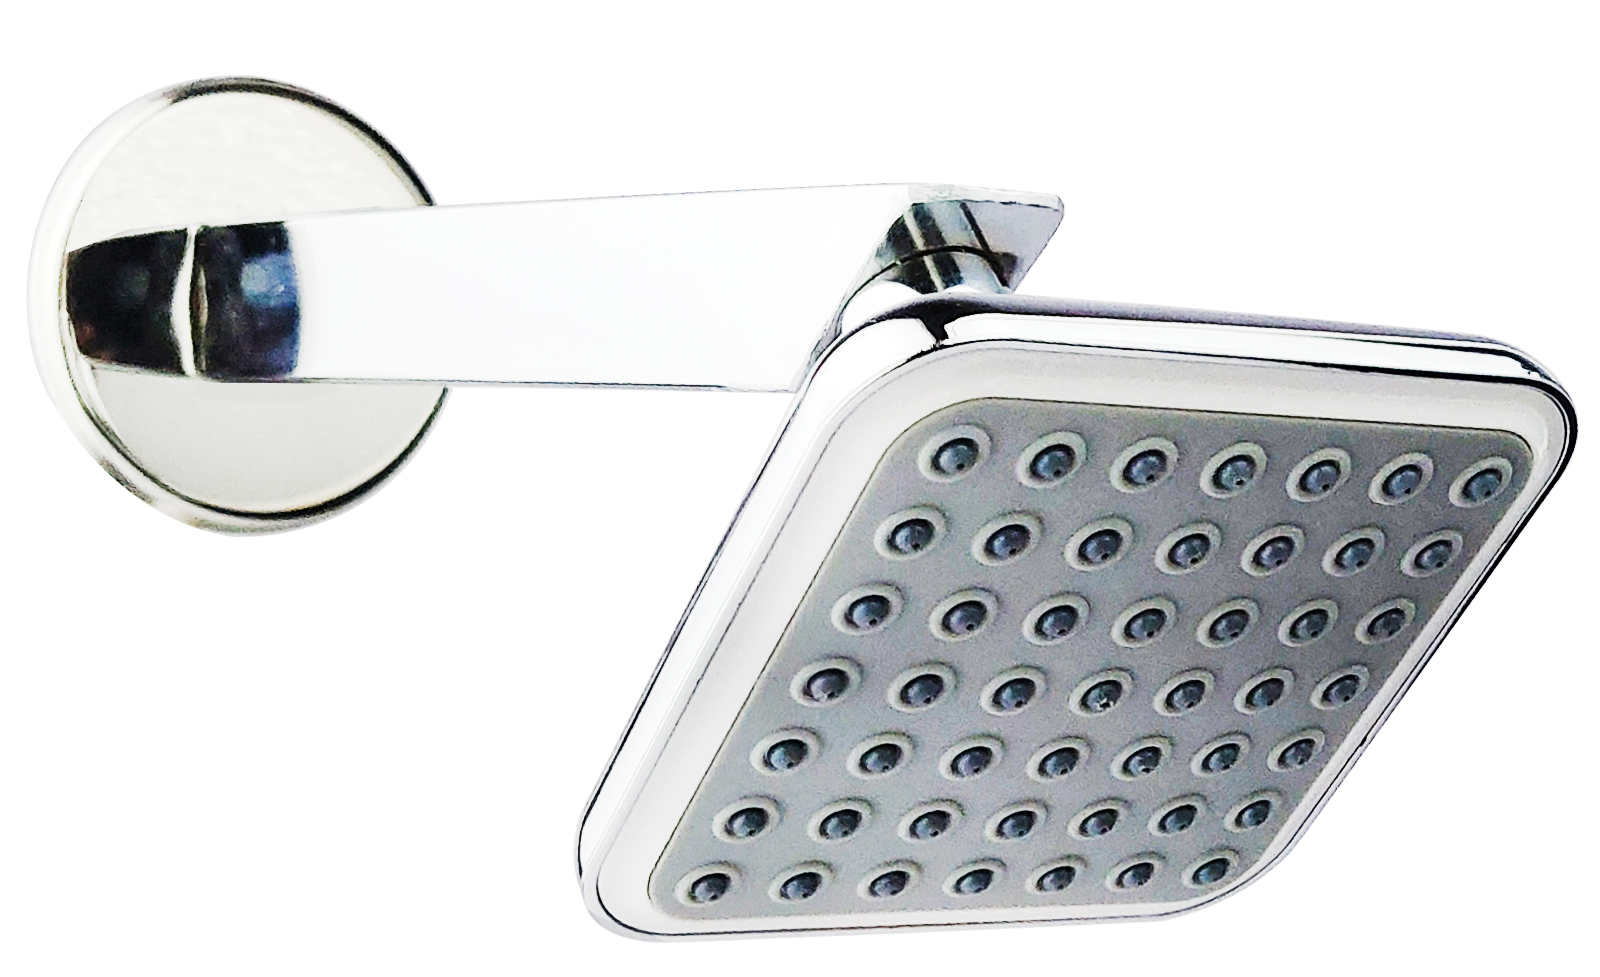 Overhead Shower opal squaro with 9 Inch sq.Shower Arm and CP.flange